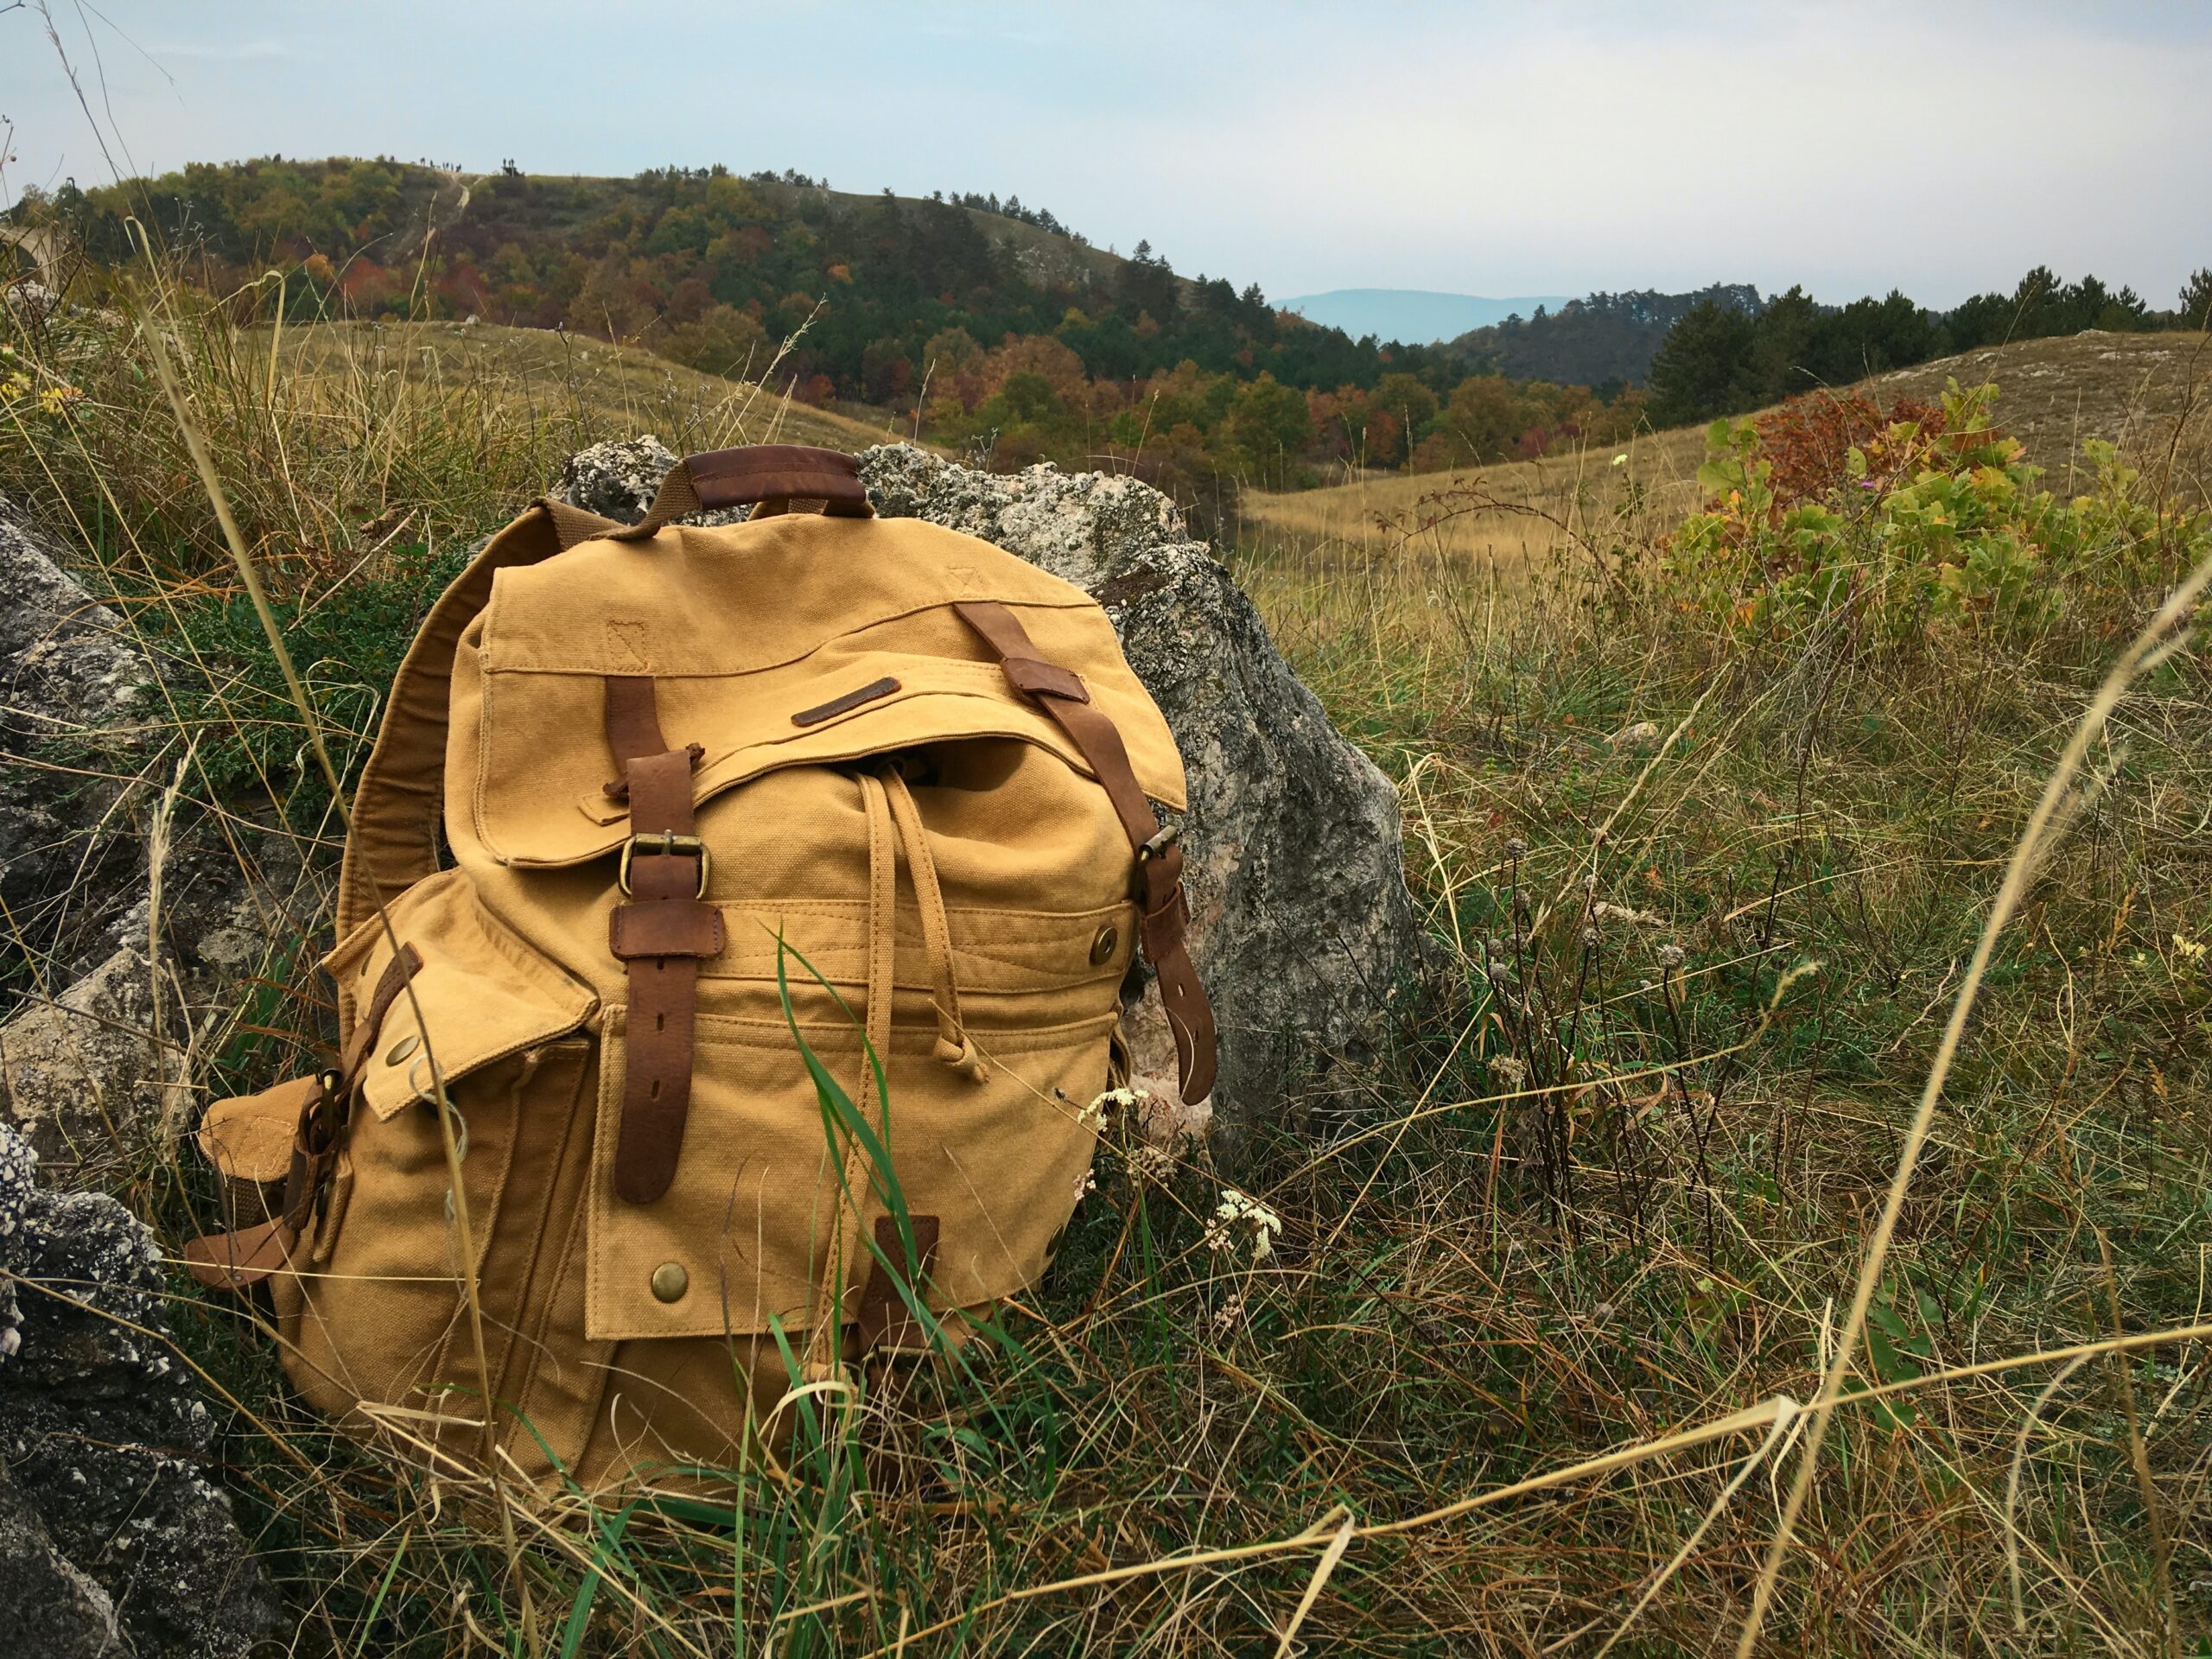 A hiking backpack in a grassy field. Photo by Adam Hornyak on Unsplash